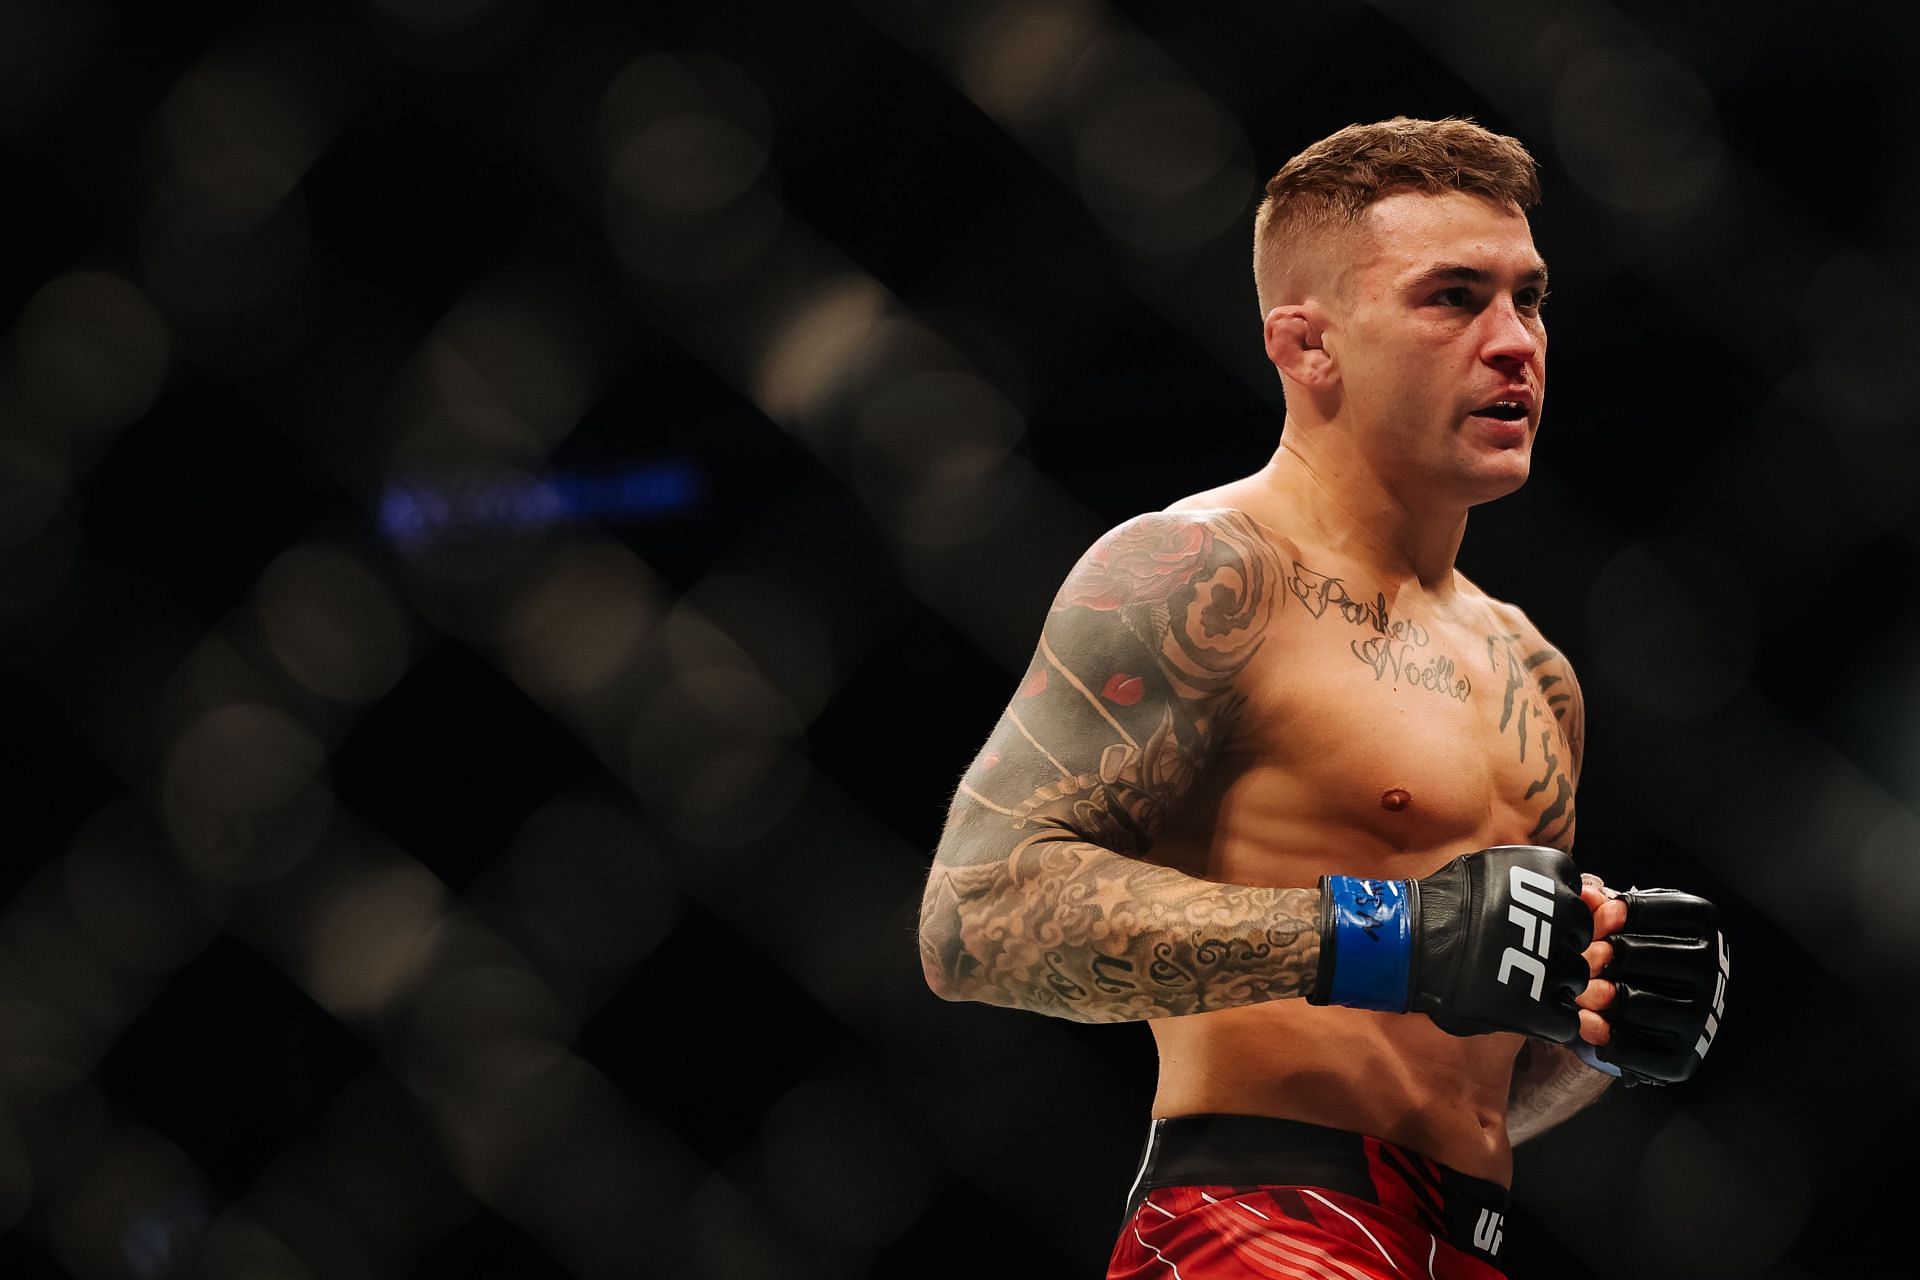 Dustin Poirier has struggled to perform at his best in title bouts